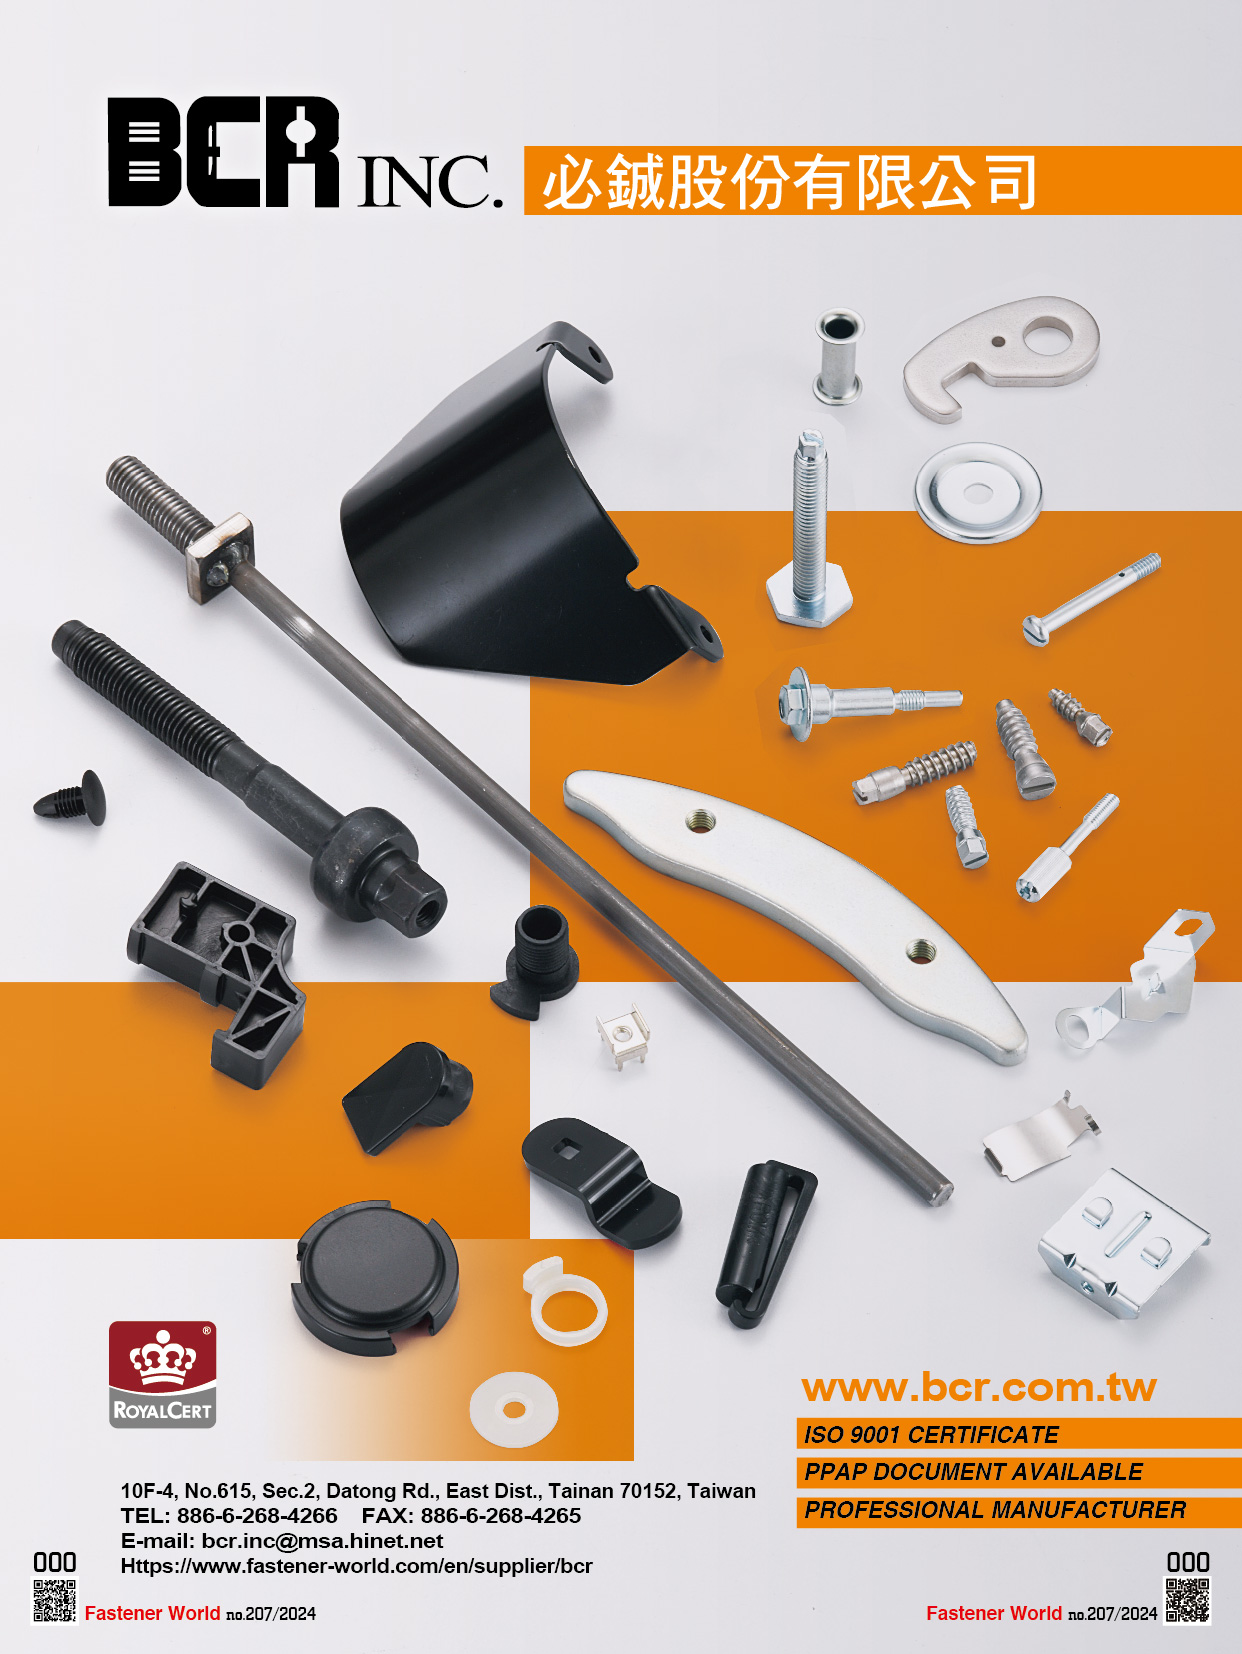 BCR INC. , Brass Inserts, Hose Clamp Screw, Multi-Forged Parts, Spacers / Bushings / Sleeves